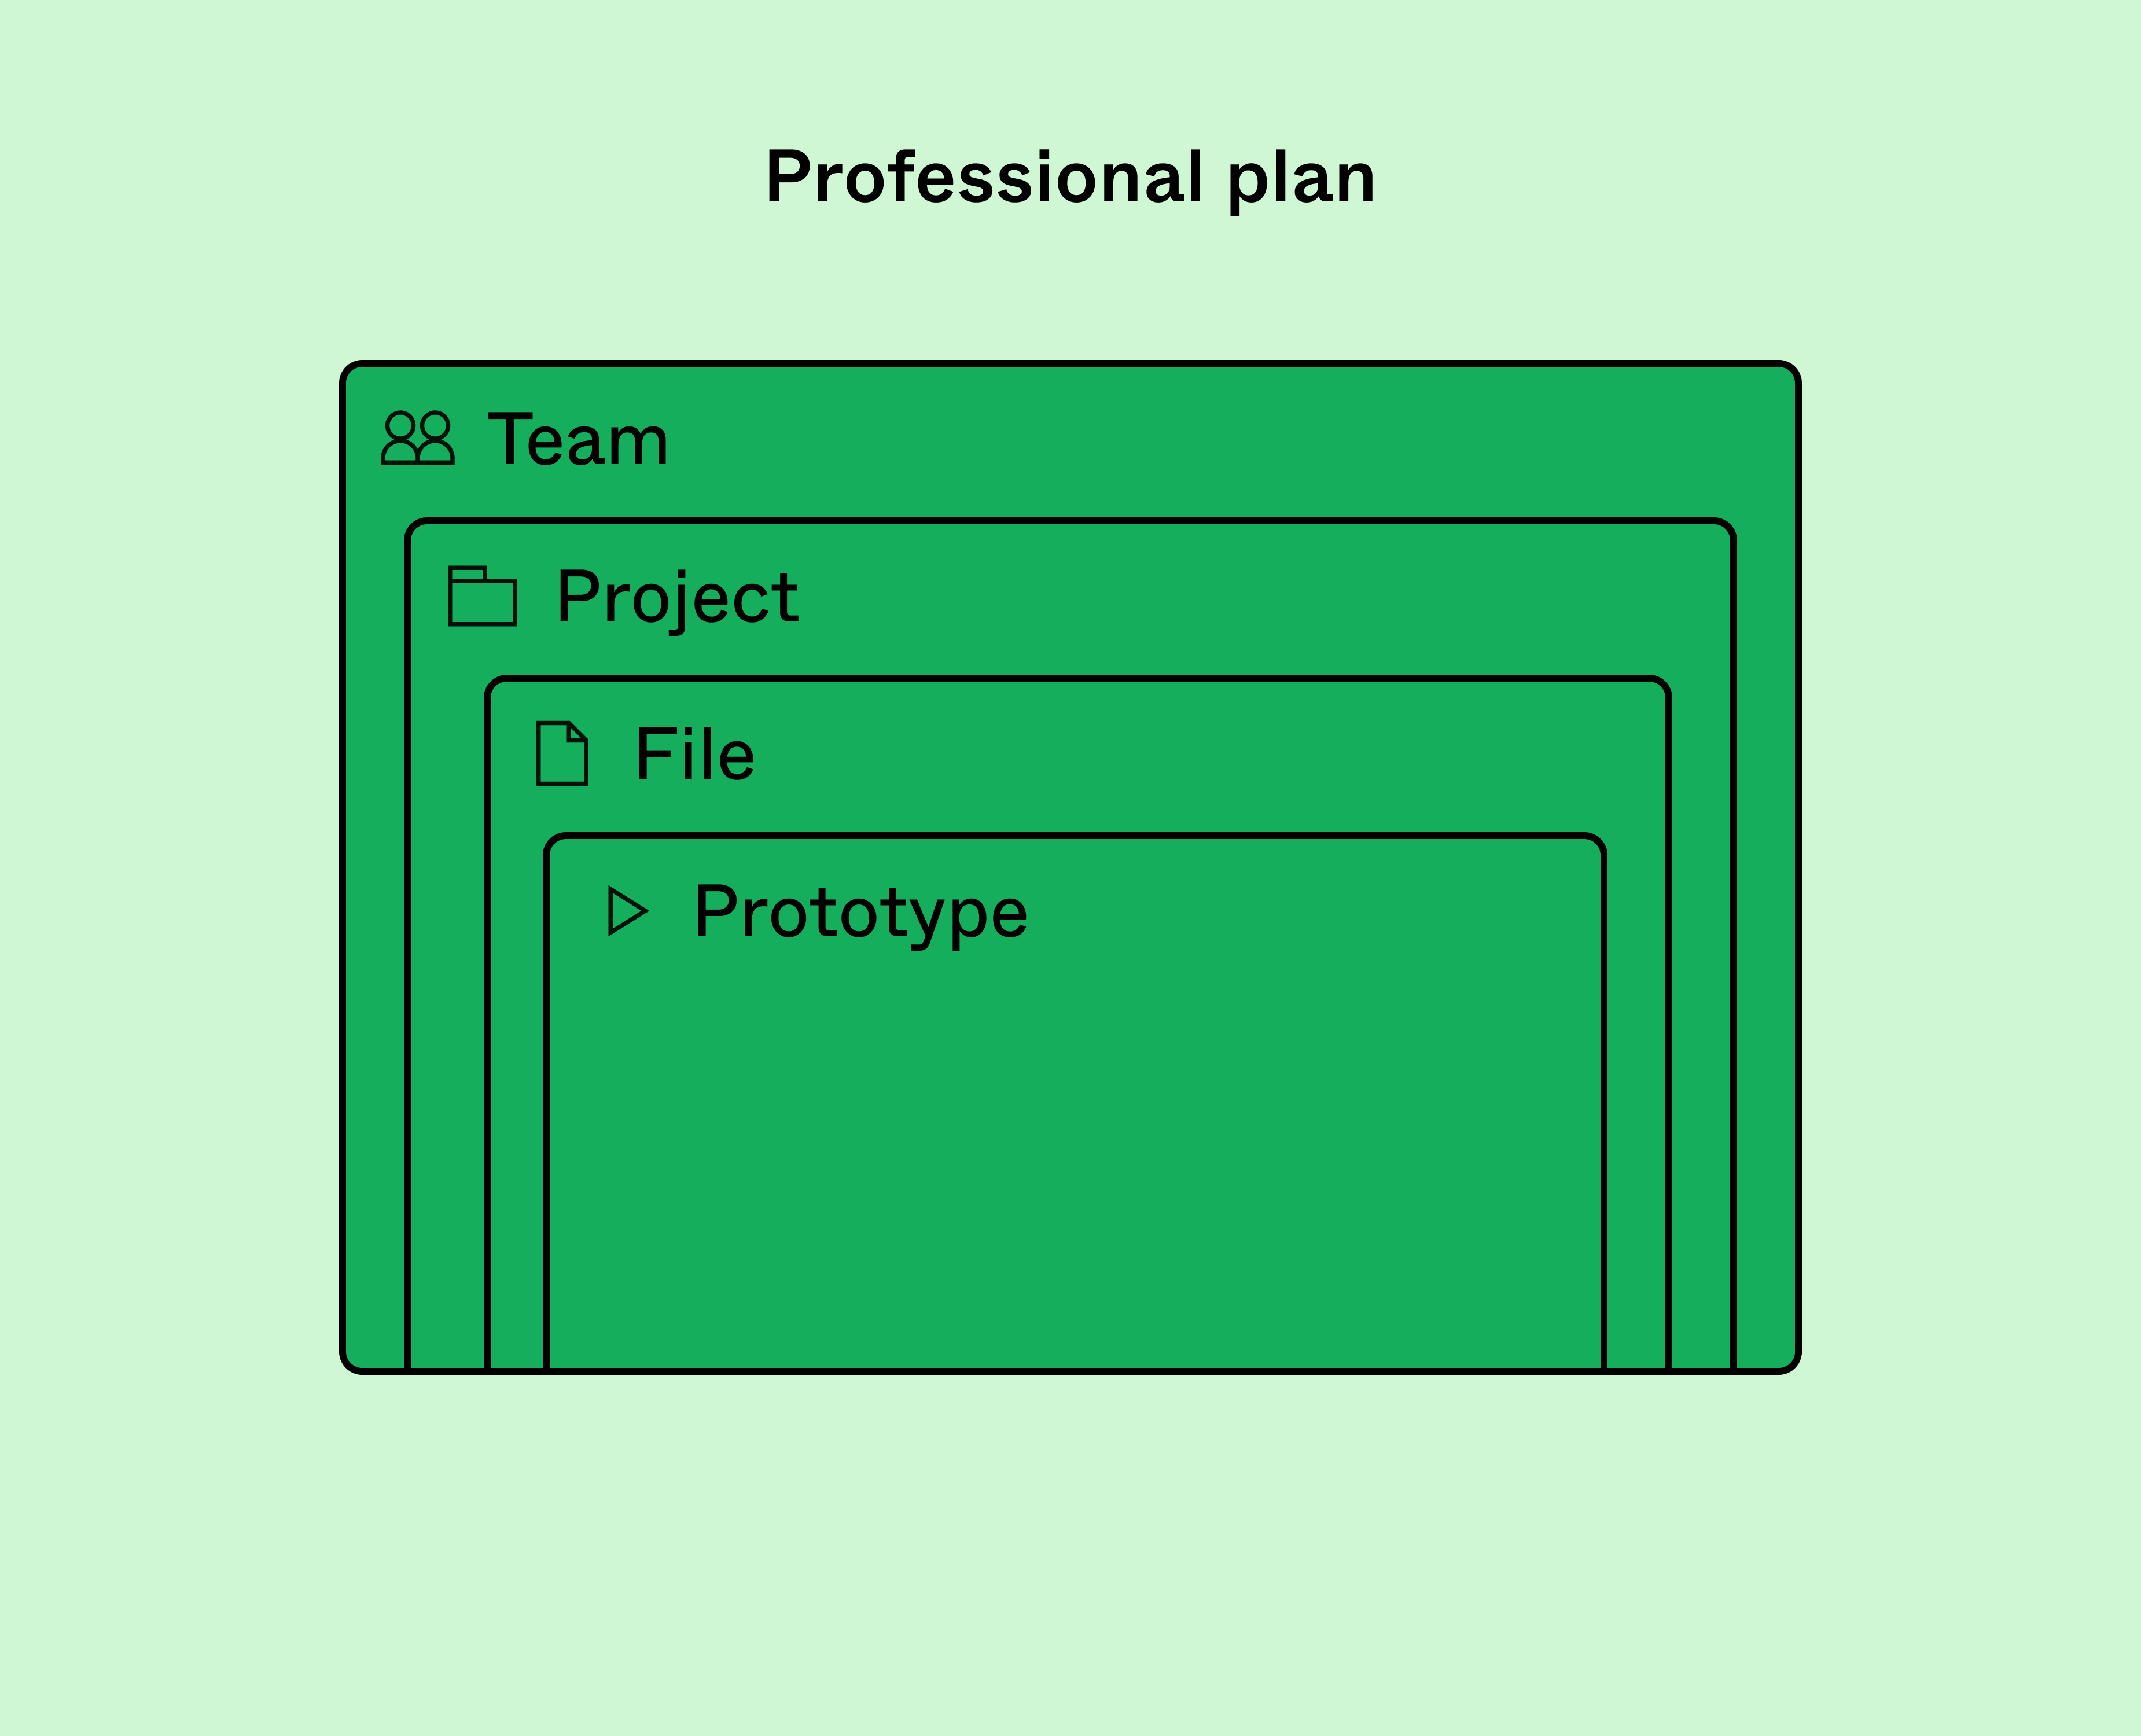 Share the team, projects, files, or prototypes on the Professional plan